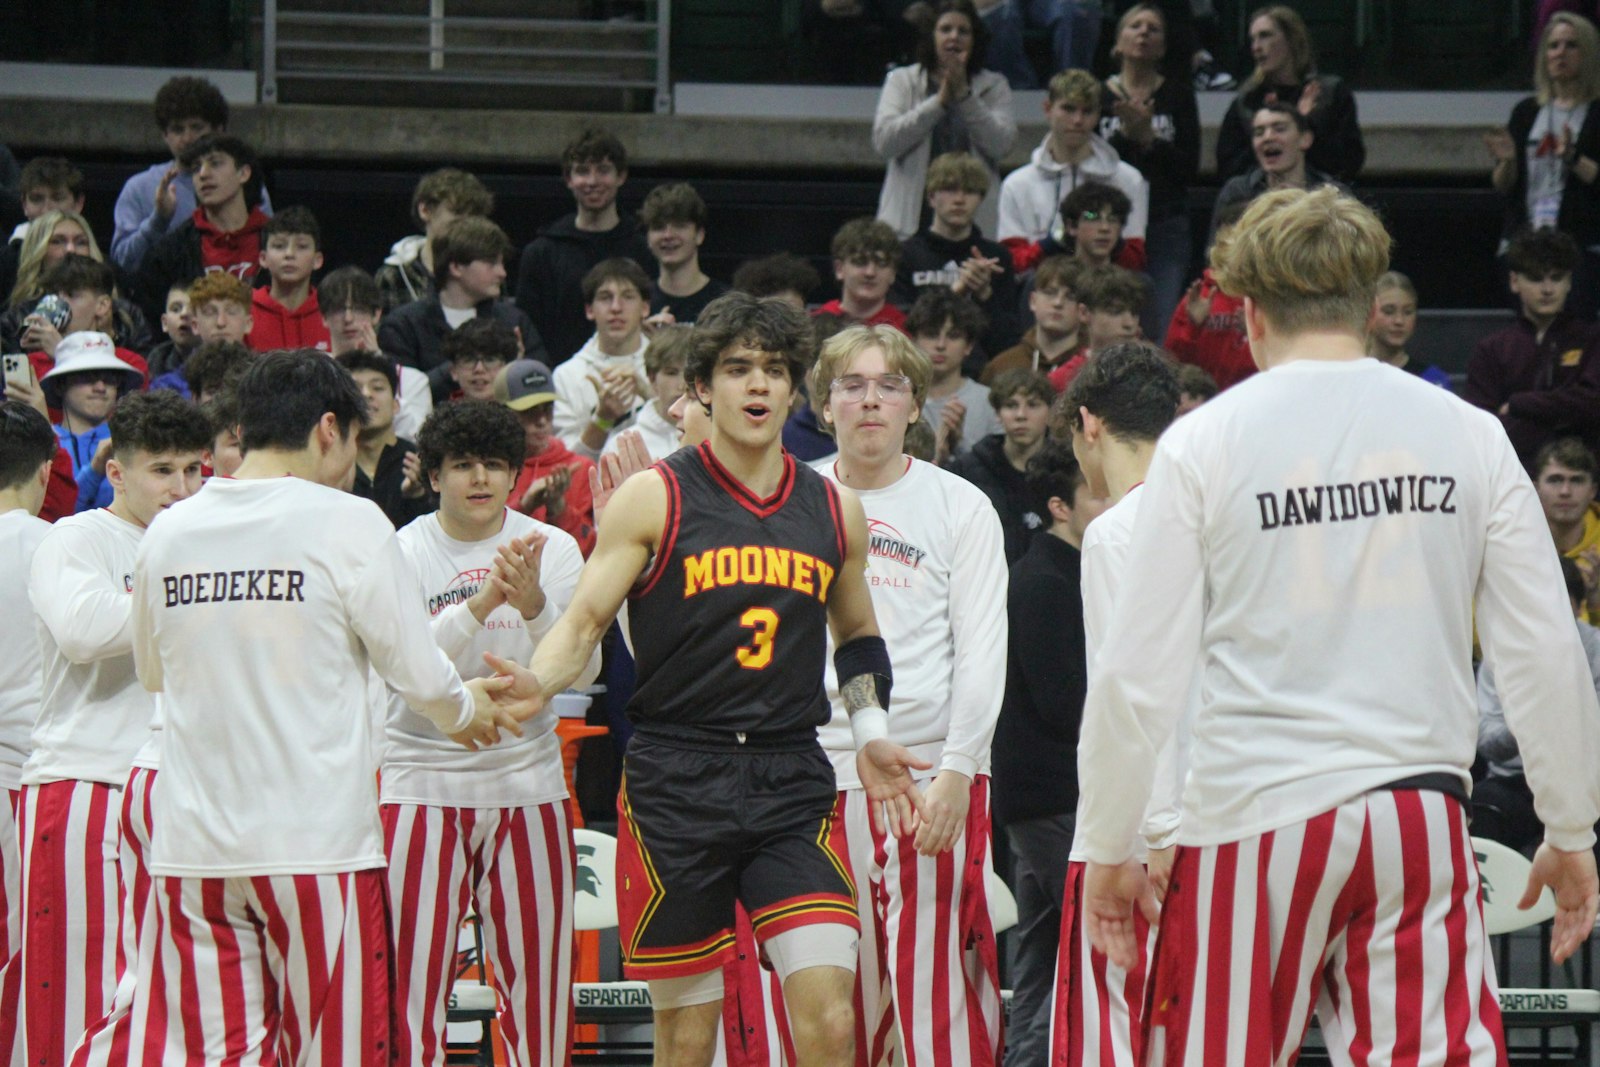 Guard Trent Rice, Cardinal Mooney’s leading scorer this season, is introduced as part of the starting lineup for the Cardinals’ semi-final tilt with Munising. He led the team with 19 points in the game.